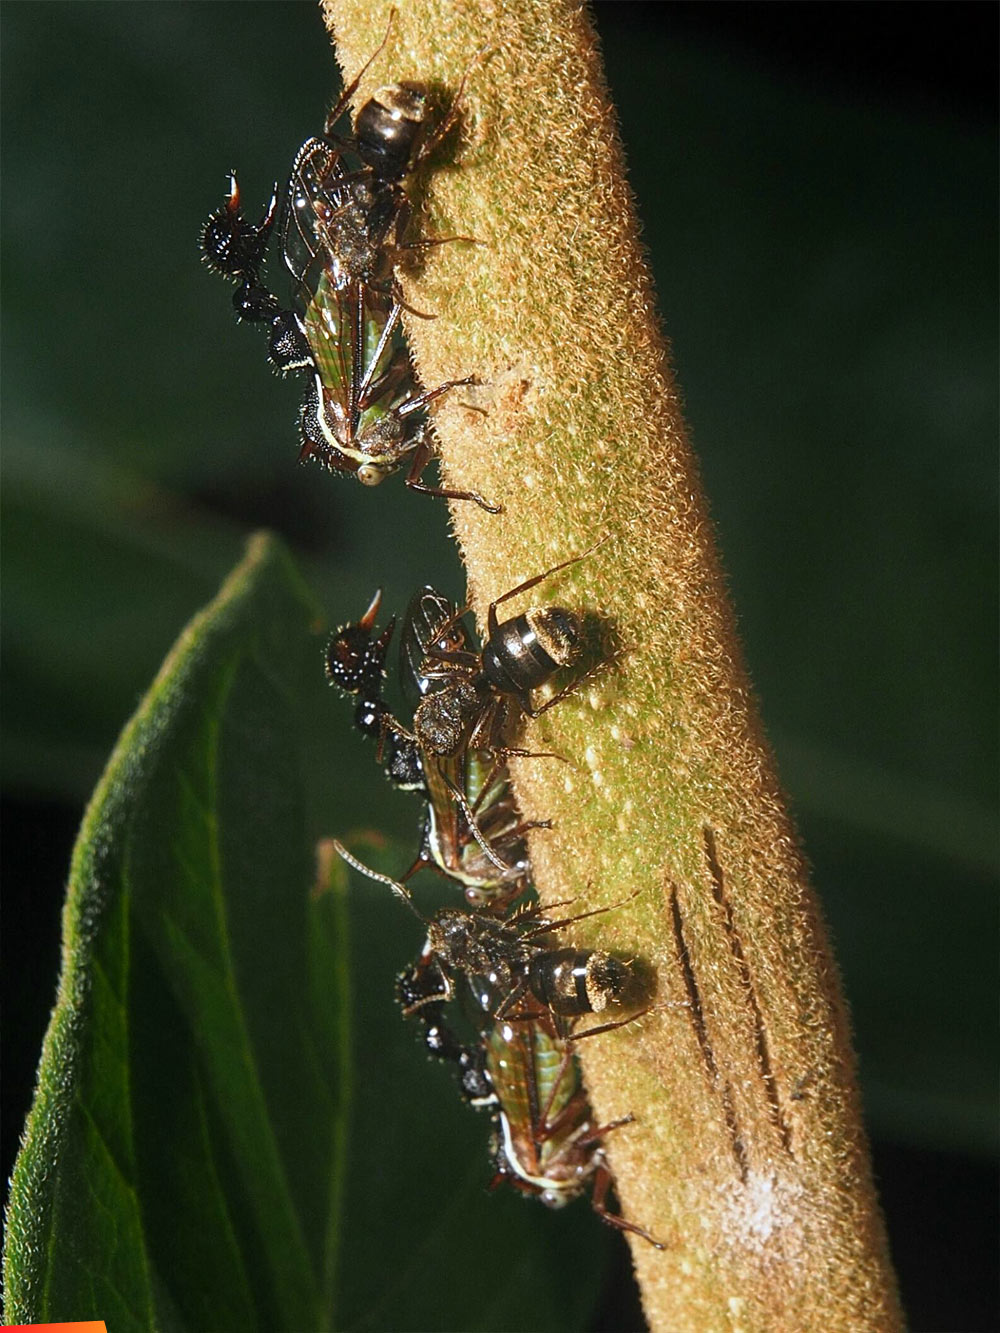 Ants farming helmeted treehoppers